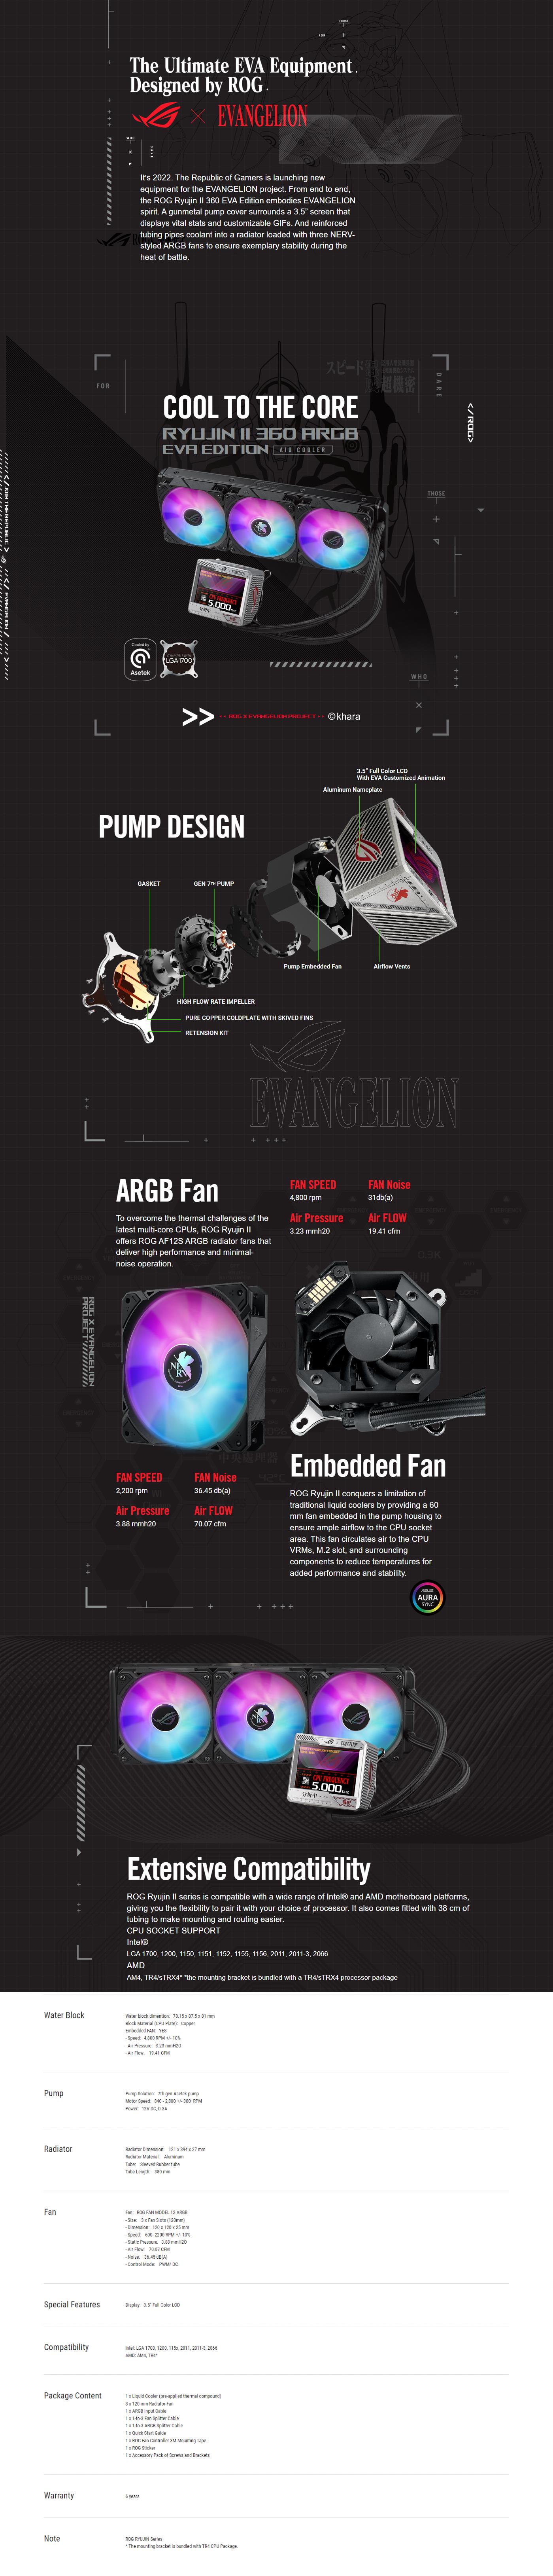 A large marketing image providing additional information about the product ASUS ROG RYUJIN II 360 EVA Edition AIO Liquid CPU Cooler - Additional alt info not provided